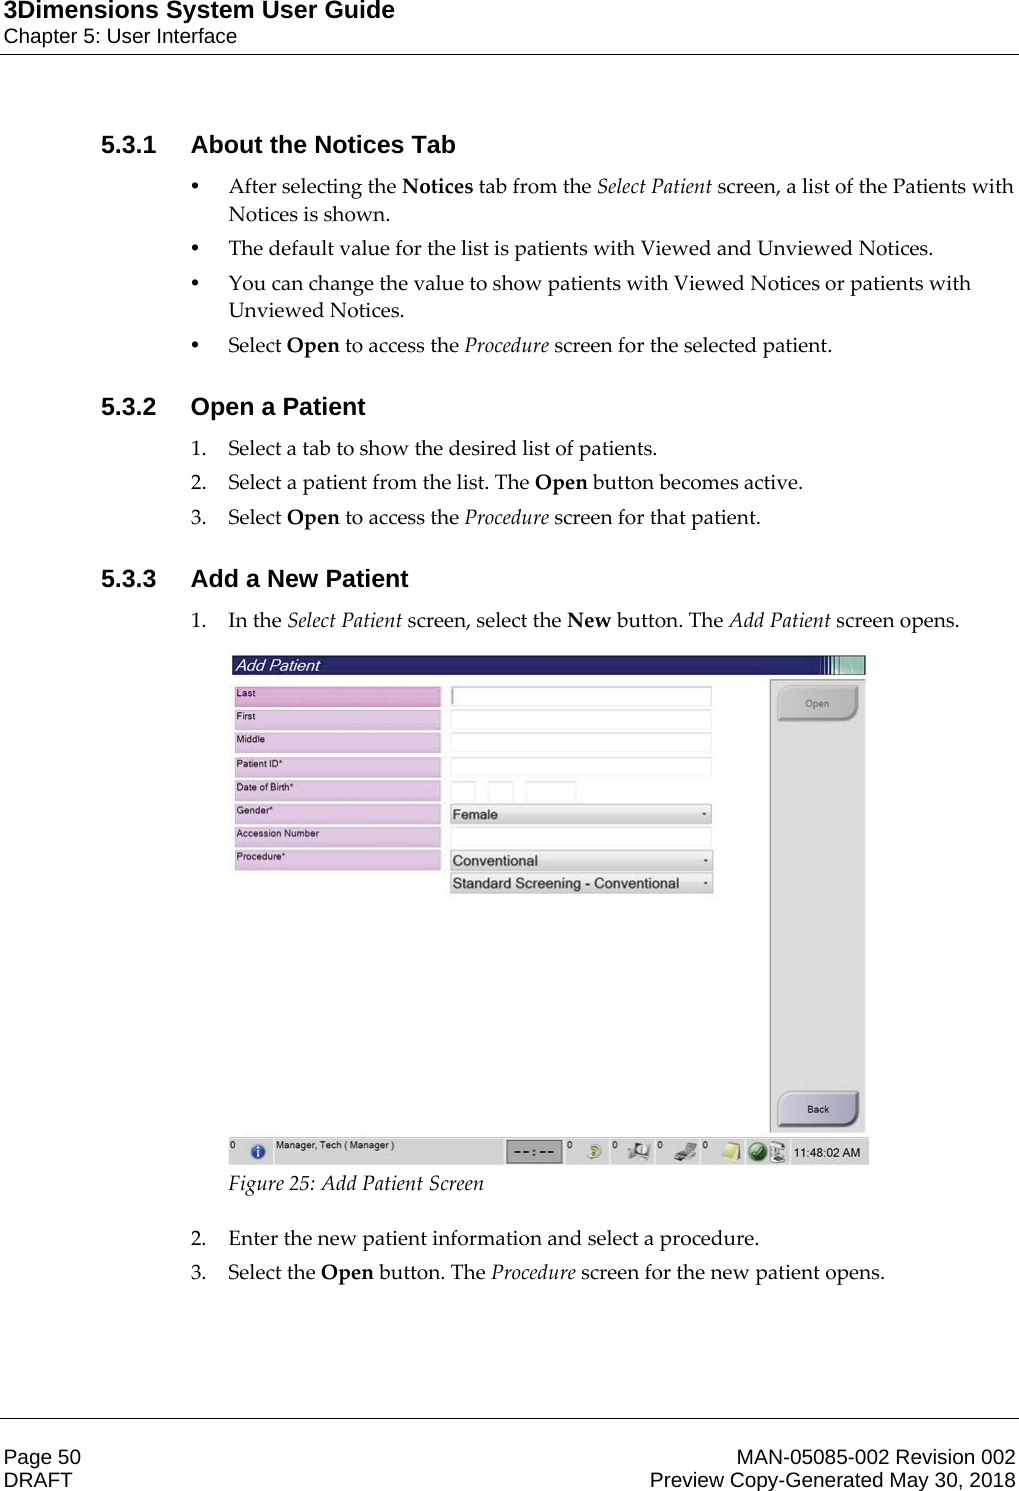 3Dimensions System User GuideChapter 5: User InterfacePage 50 MAN-05085-002 Revision 002  DRAFT Preview Copy-Generated May 30, 20185.3.1 About the Notices Tab•After selecting the Notices tab from the Select Patient screen, a list of the Patients with Notices is shown. •The default value for the list is patients with Viewed and Unviewed Notices. •You can change the value to show patients with Viewed Notices or patients with Unviewed Notices. •Select Open to access the Procedure screen for the selected patient. 5.3.2 Open a Patient1. Select a tab to show the desired list of patients. 2. Select a patient from the list. The Open button becomes active. 3. Select Open to access the Procedure screen for that patient. 5.3.3 Add a New Patient1. In the Select Patient screen, select the New button. The Add Patient screen opens.  Figure 25: Add Patient Screen    2. Enter the new patient information and select a procedure. 3. Select the Open button. The Procedure screen for the new patient opens. 